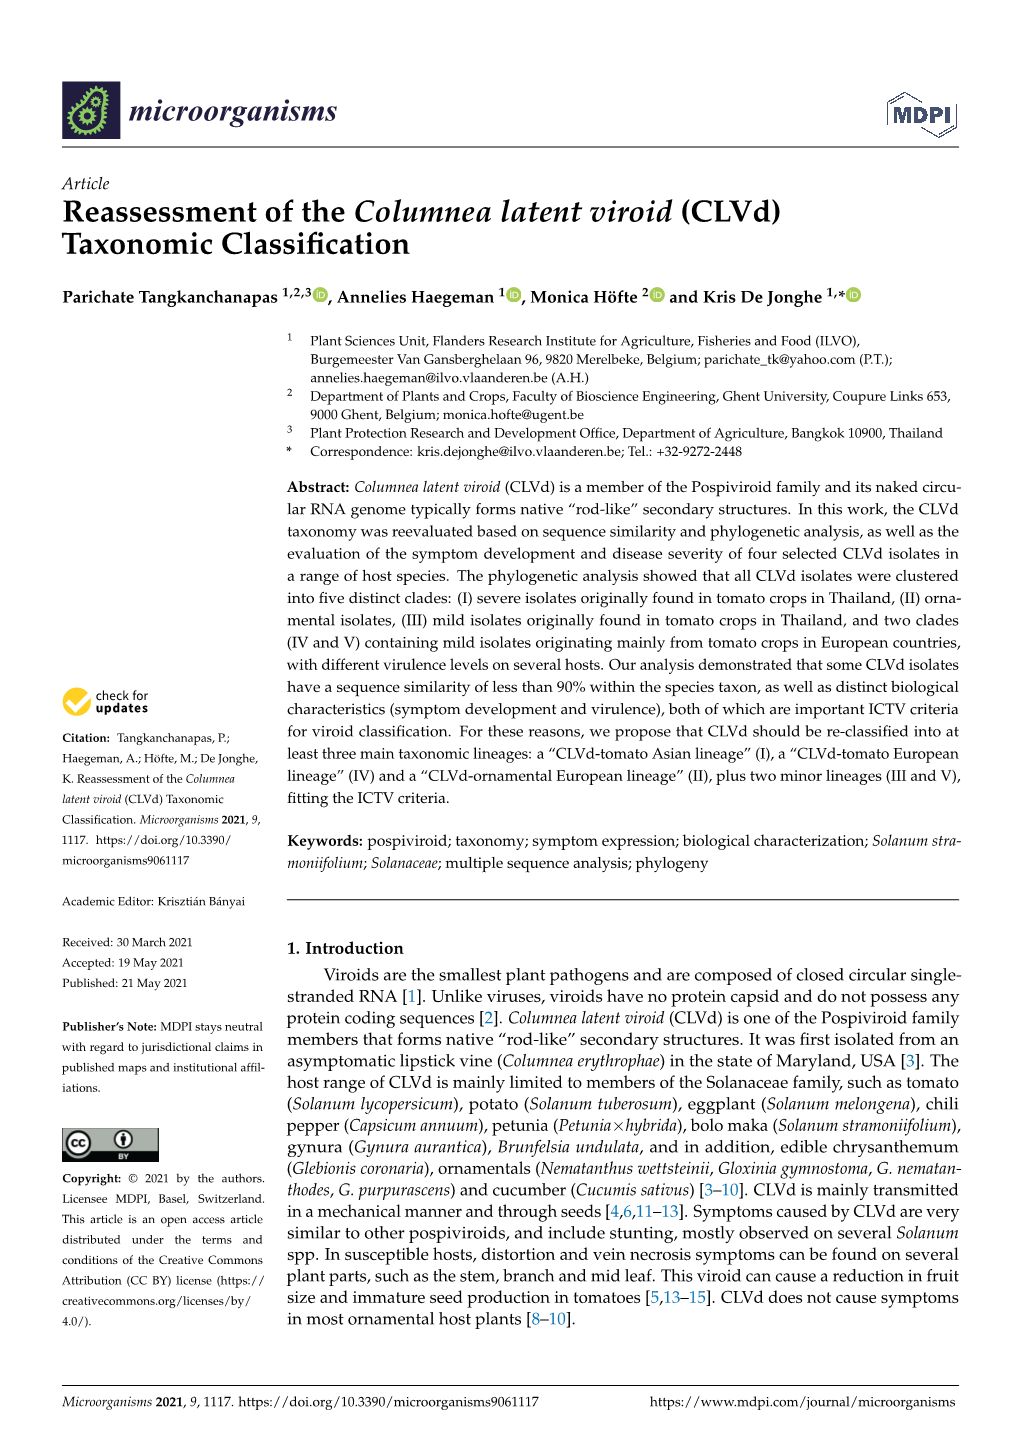 Reassessment of the Columnea Latent Viroid (Clvd) Taxonomic Classification